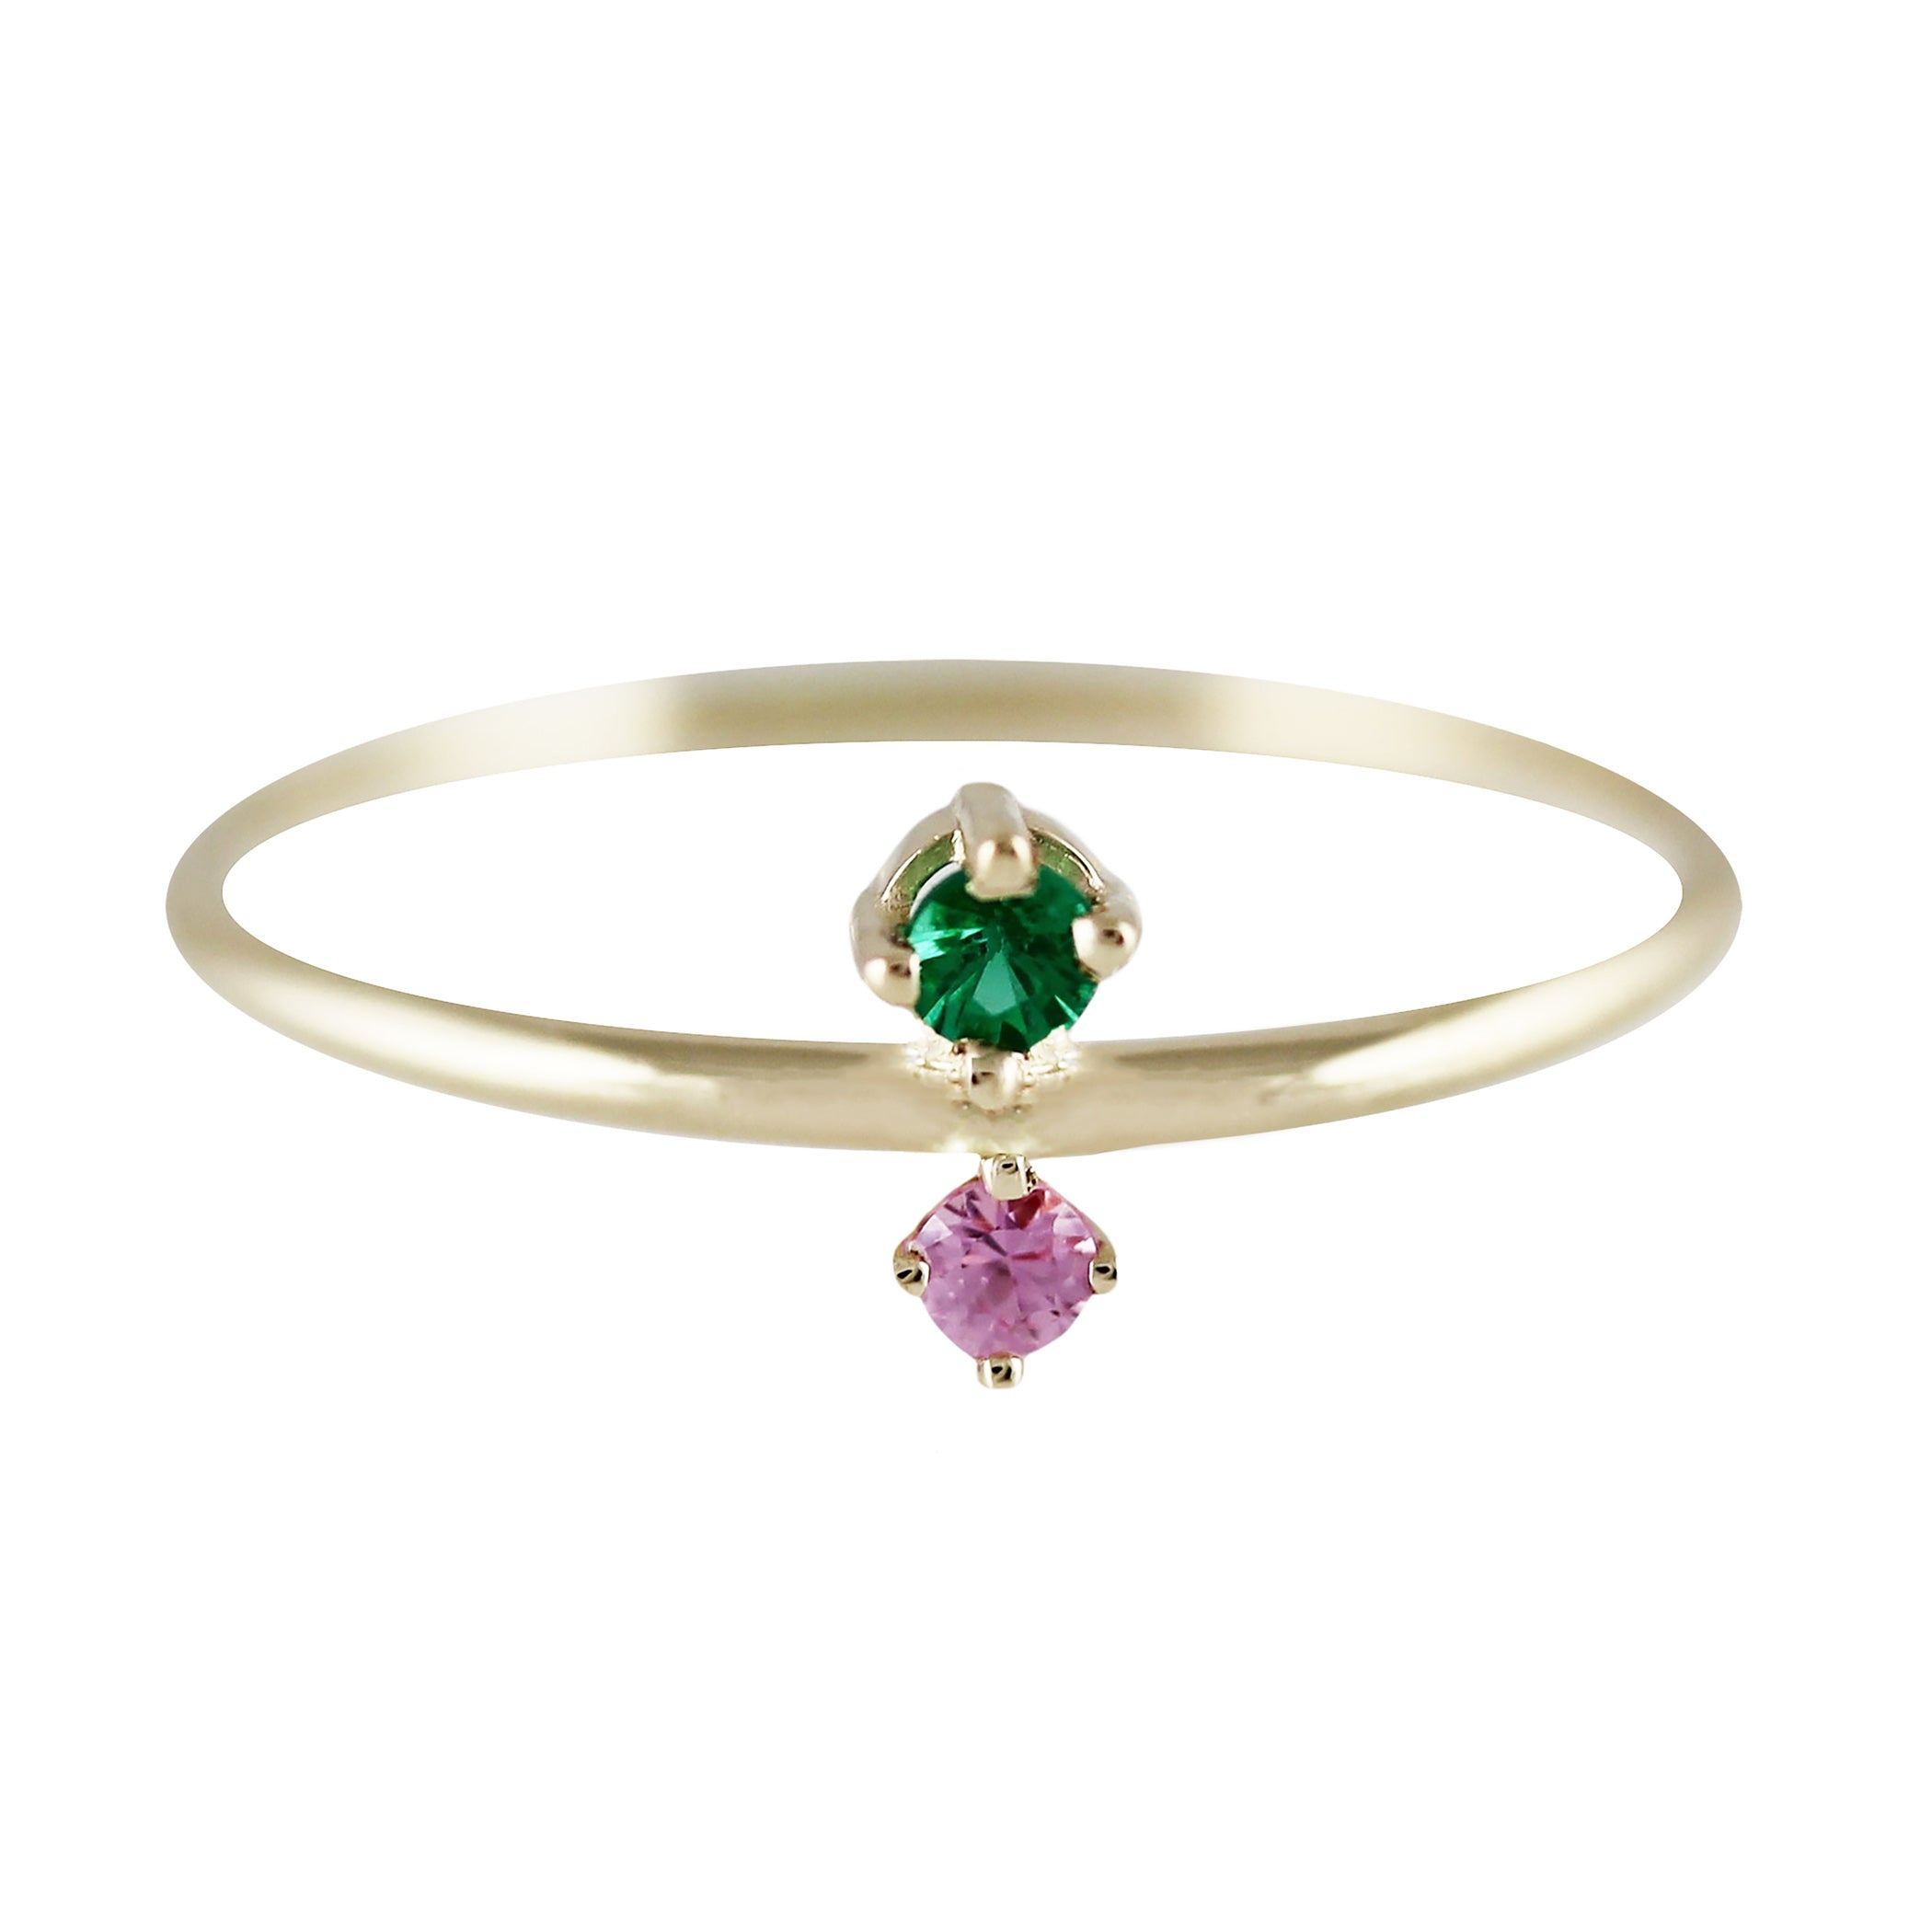 JUMELLE EMERALD AND SAPPHIRE RING